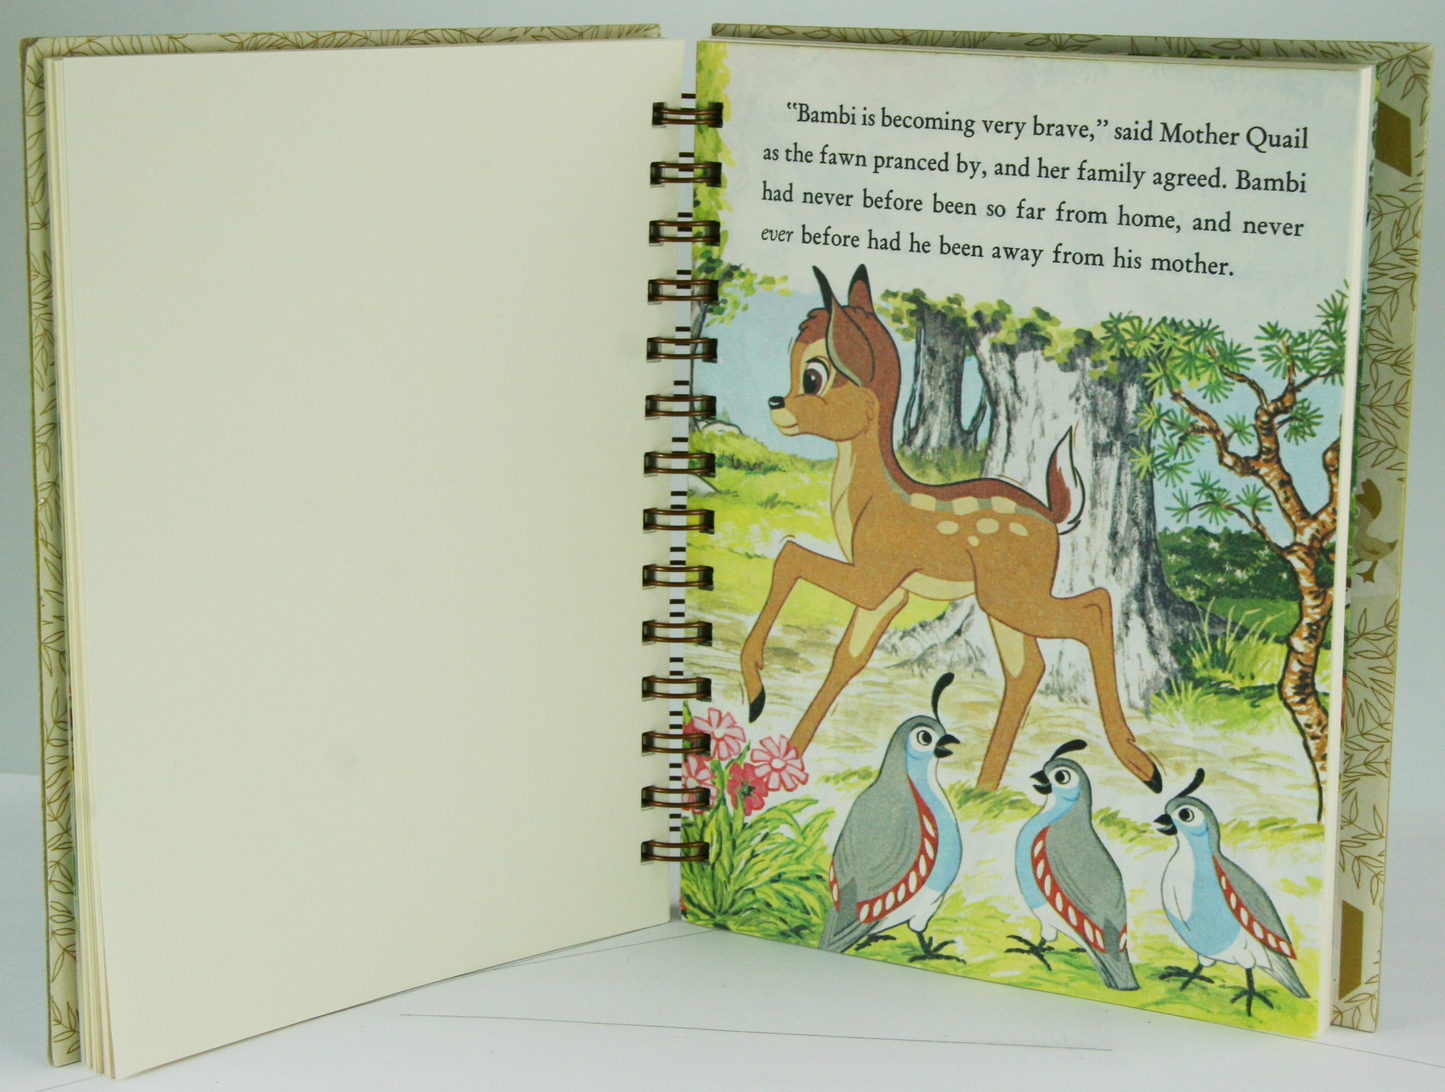 Bambi: Friends of the Forest-Red Barn Collections